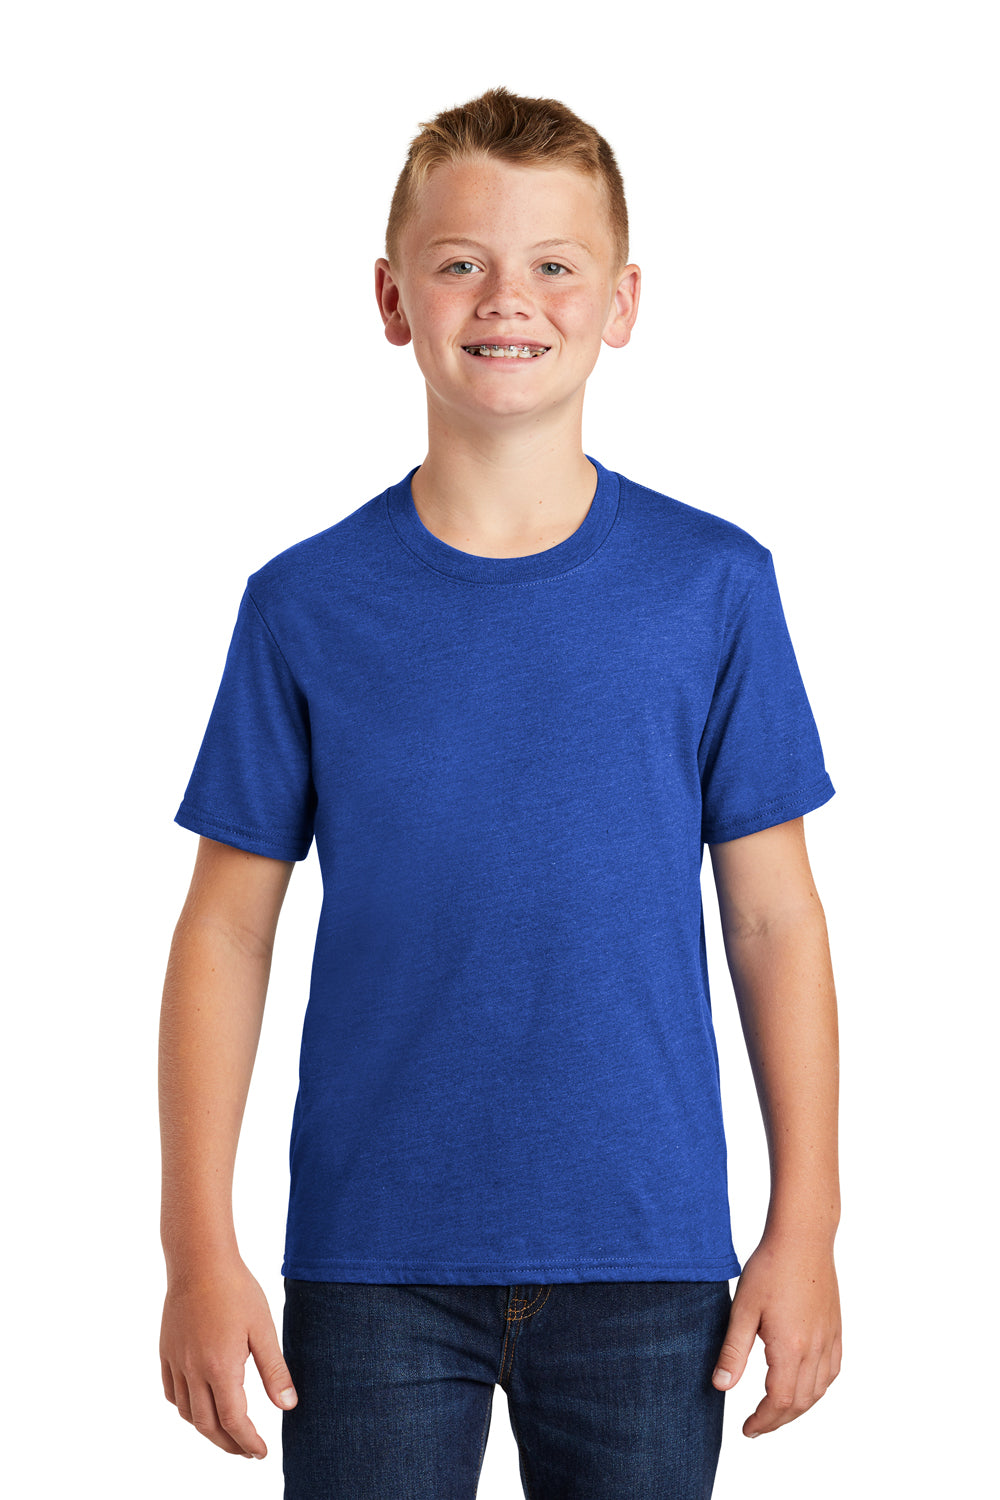 Port & Company PC455Y Youth Fan Favorite Short Sleeve Crewneck T-Shirt Heather Royal Blue Front